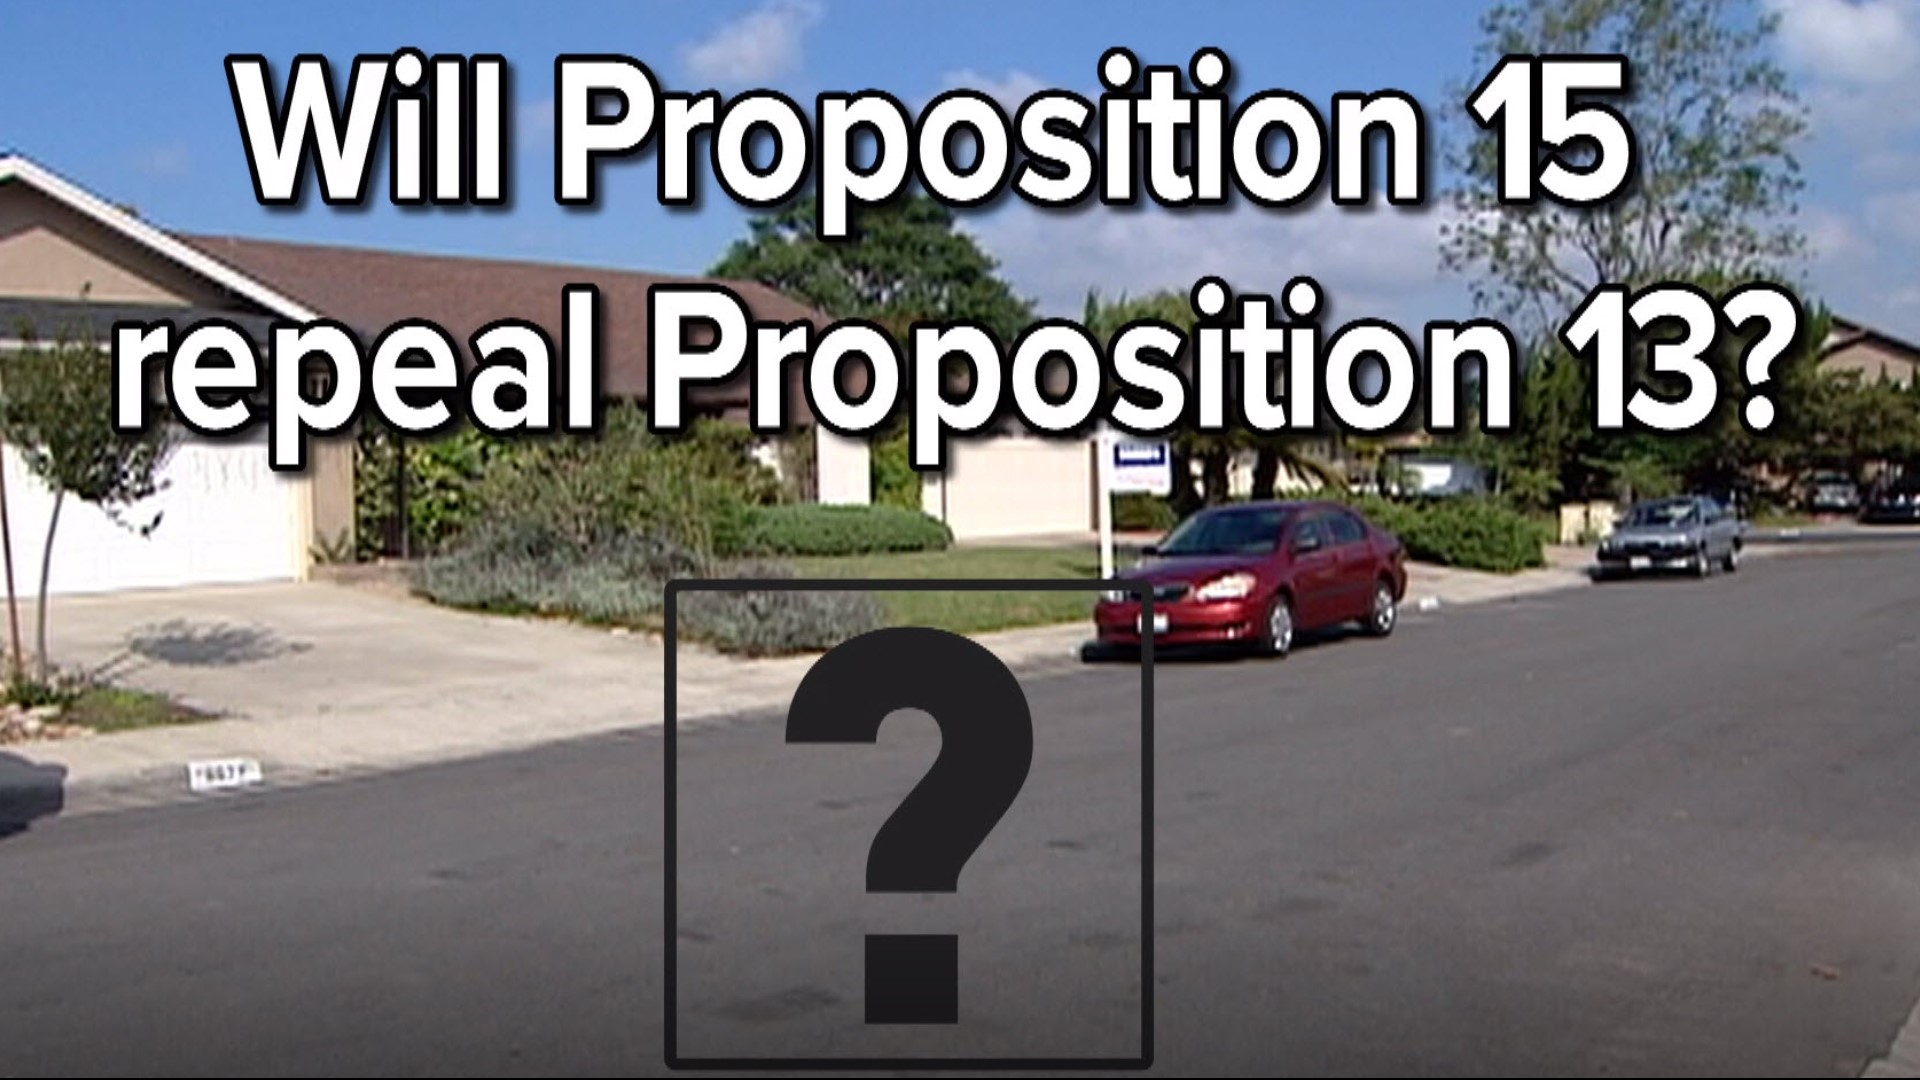 According to California's Secretary of State, the initiative would undo the property tax caps of Proposition 13, but only for commercial and industrial properties.